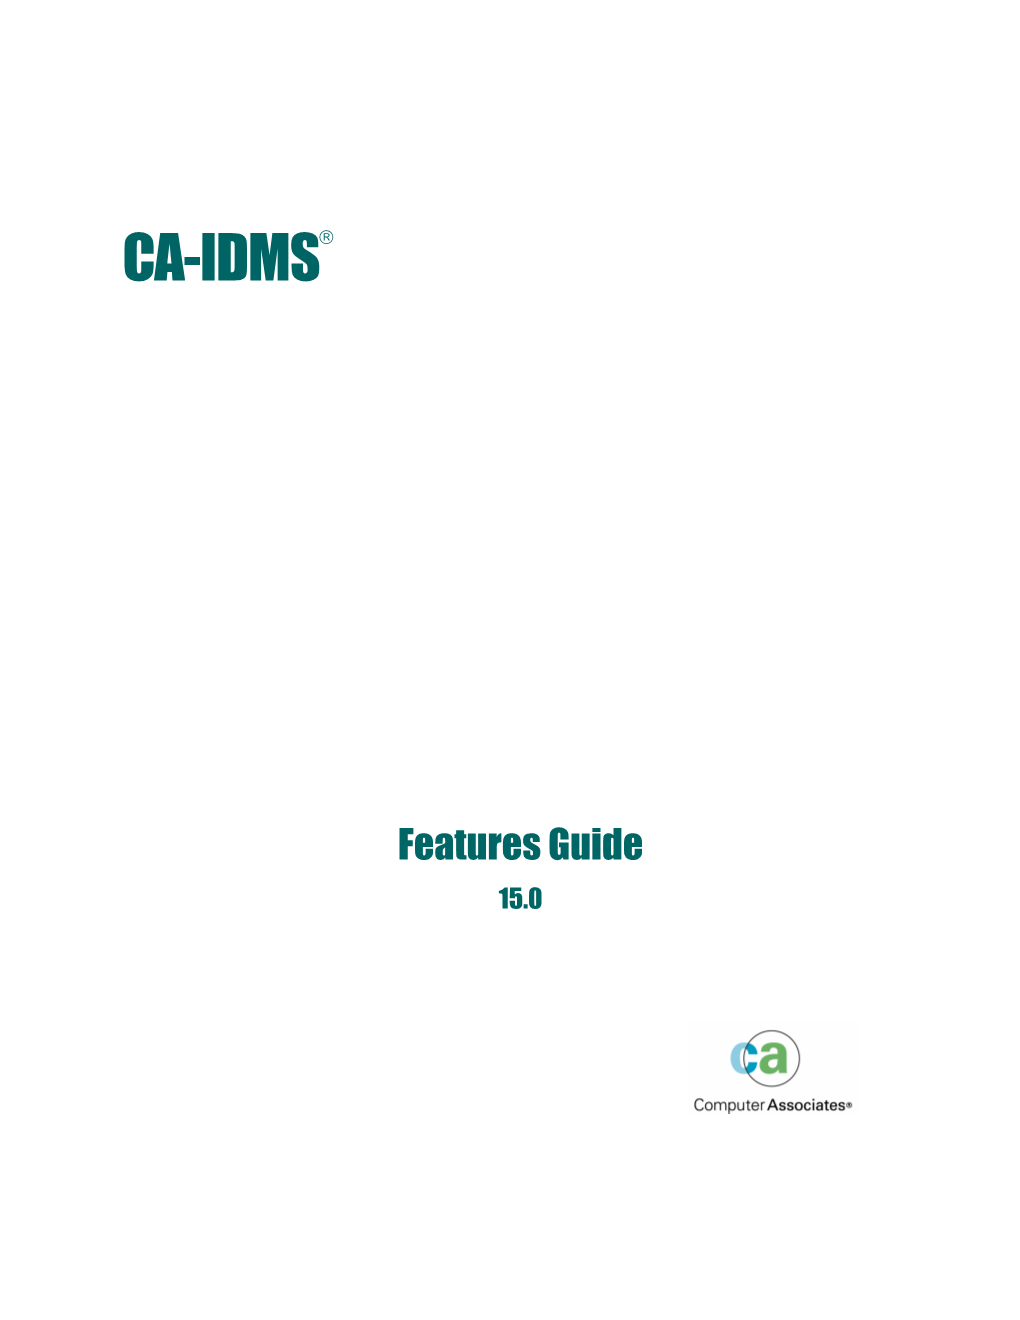 CA-IDMS 15.0 Features Guide